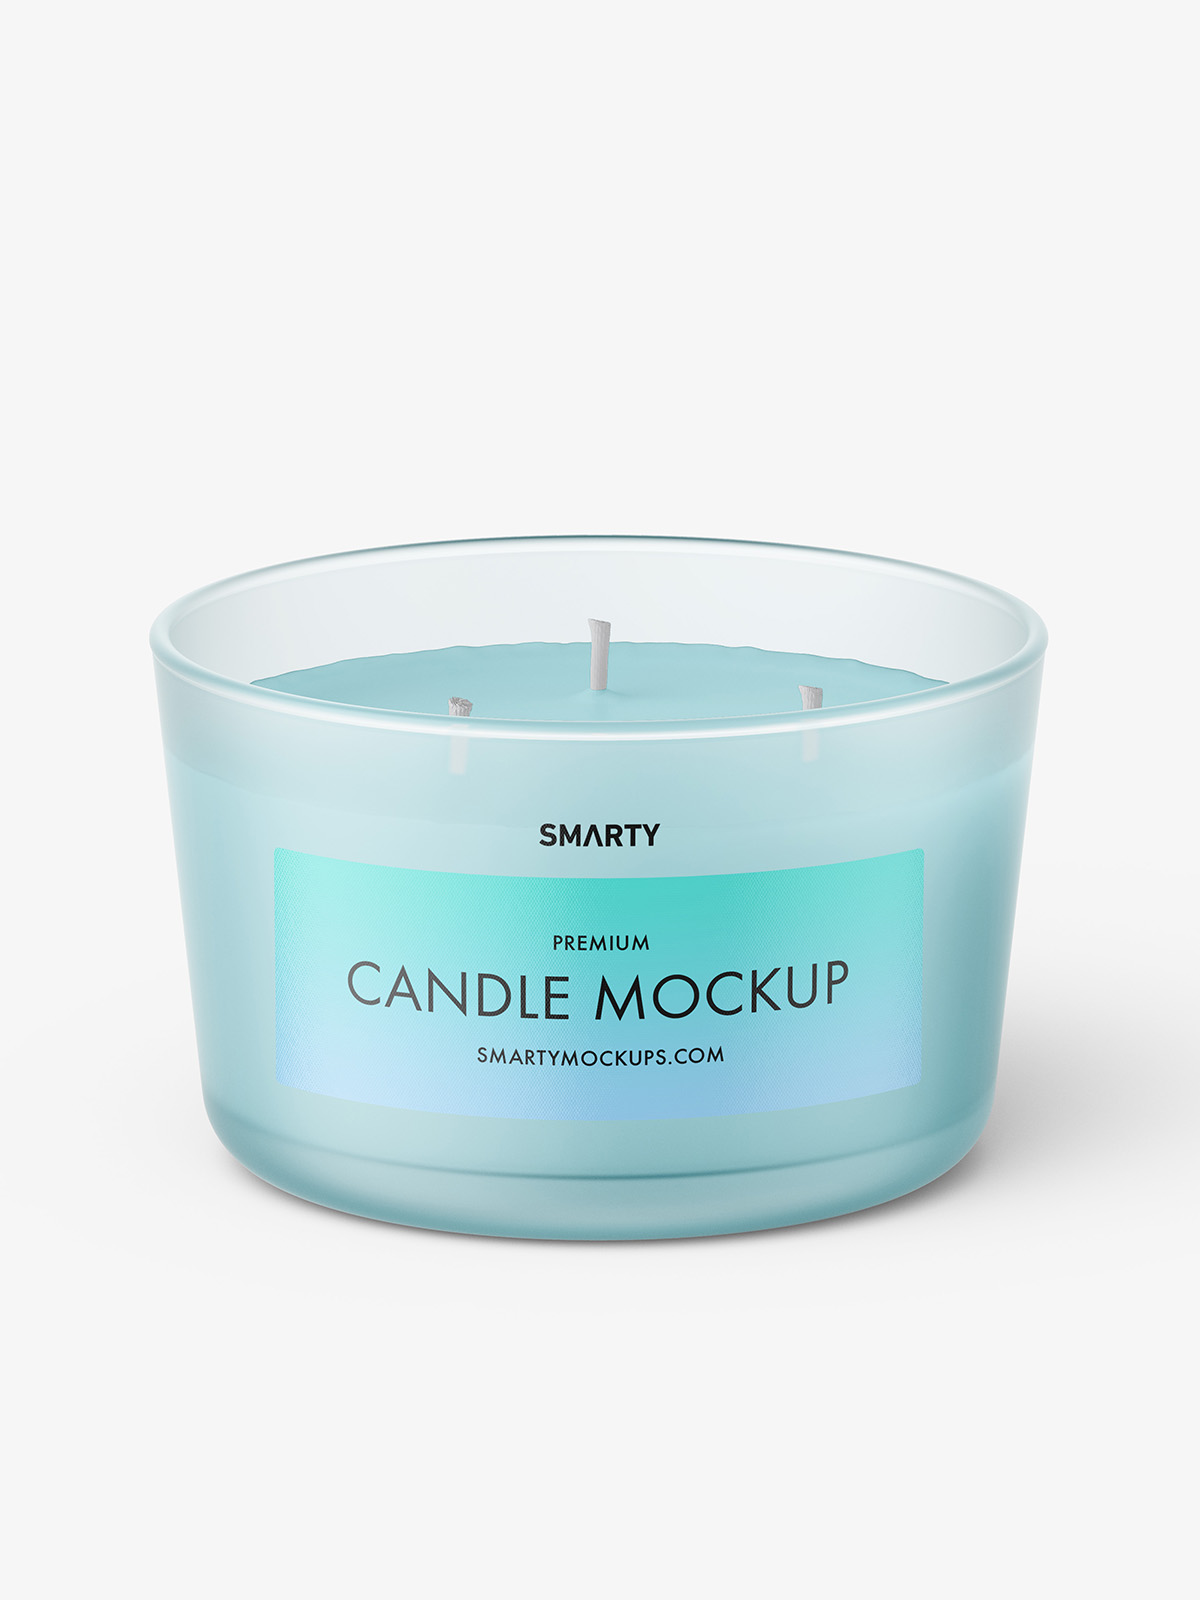 Premium PSD  Frosted glass candle jars mockup, front view